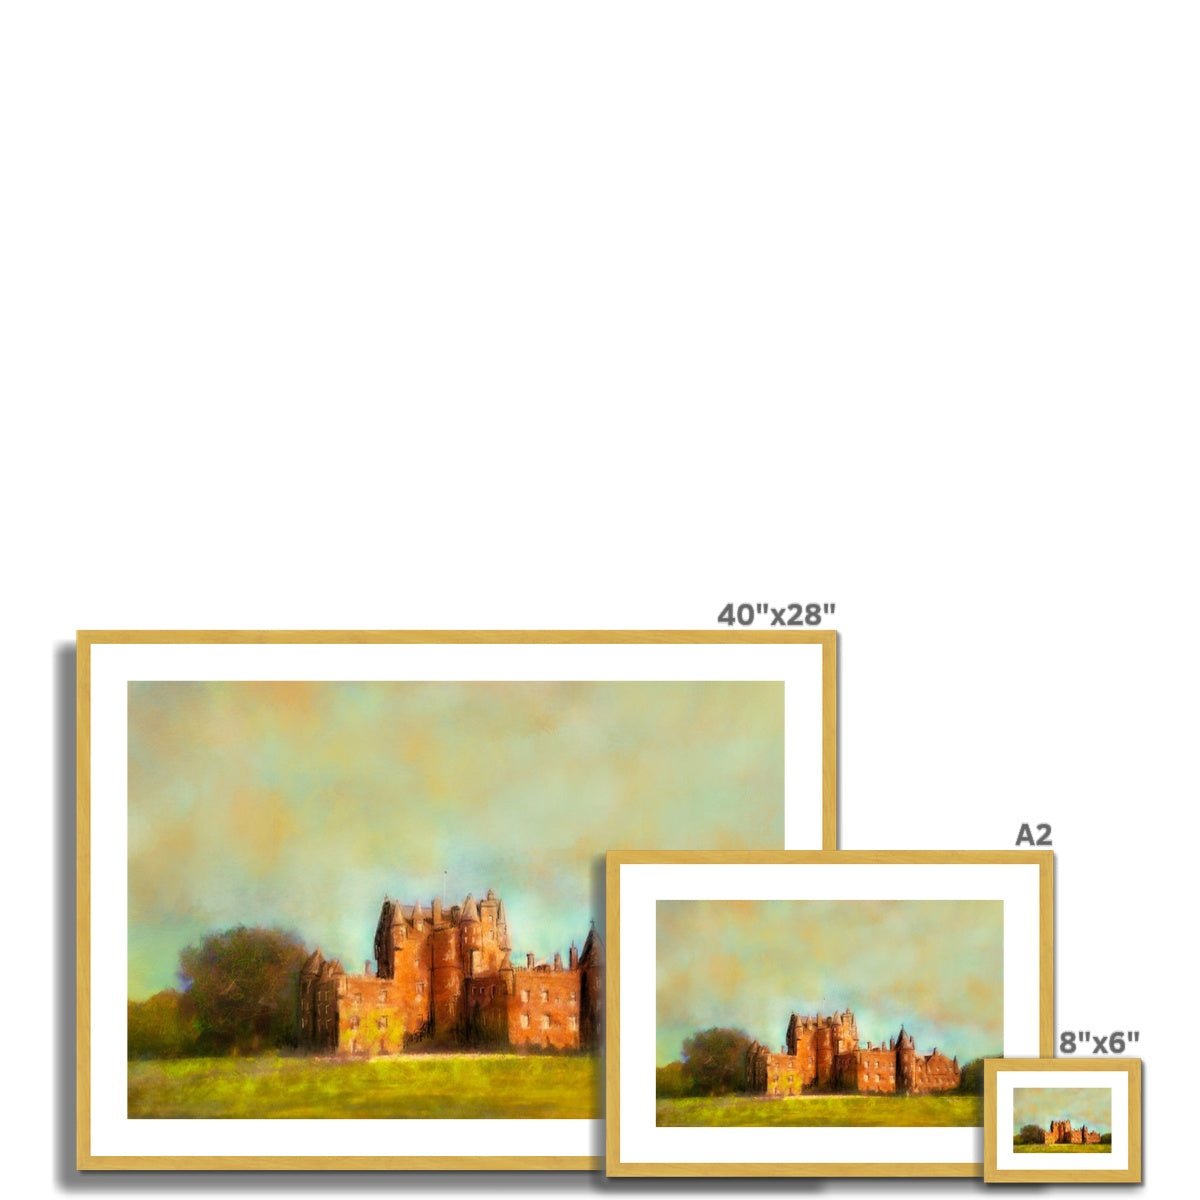 Glamis Castle Painting | Antique Framed & Mounted Prints From Scotland-Antique Framed & Mounted Prints-Historic & Iconic Scotland Art Gallery-Paintings, Prints, Homeware, Art Gifts From Scotland By Scottish Artist Kevin Hunter